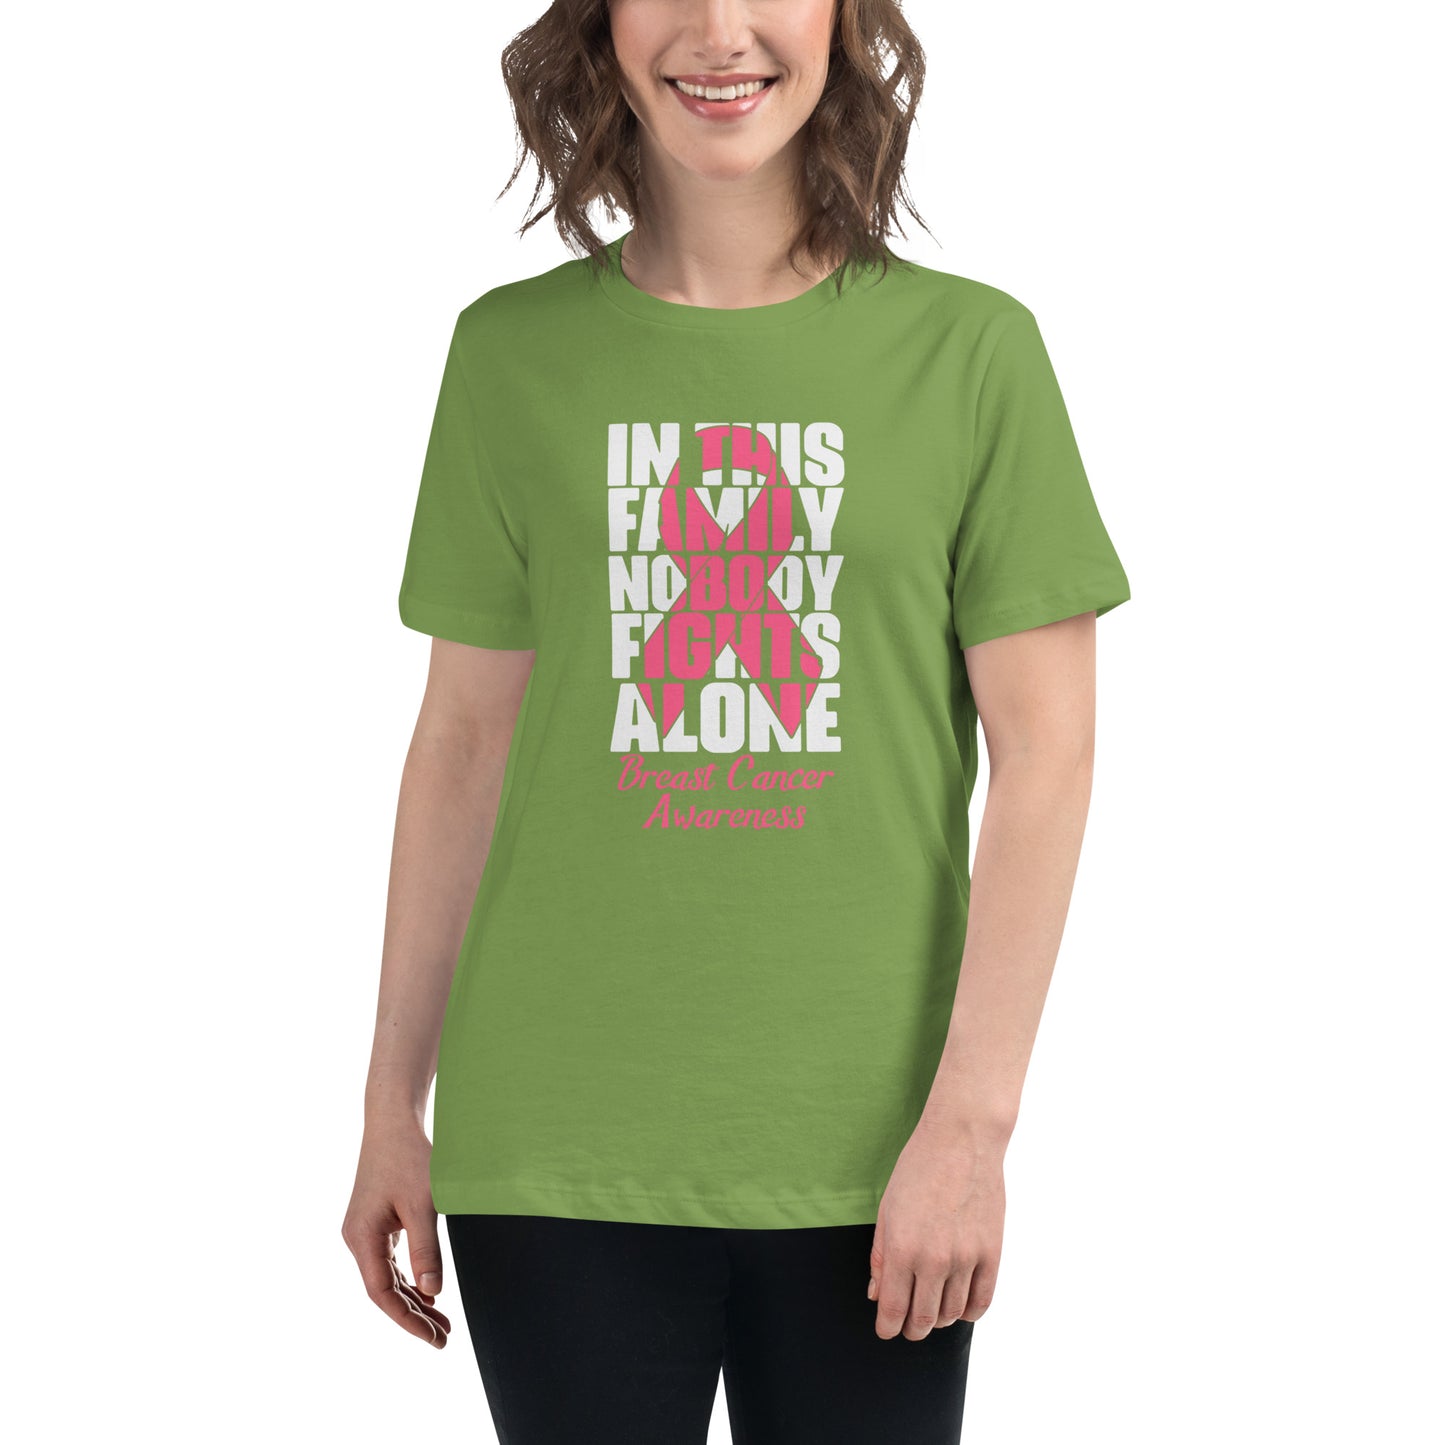 In This Family Nobody Fights Alone Women's Relaxed T-Shirt